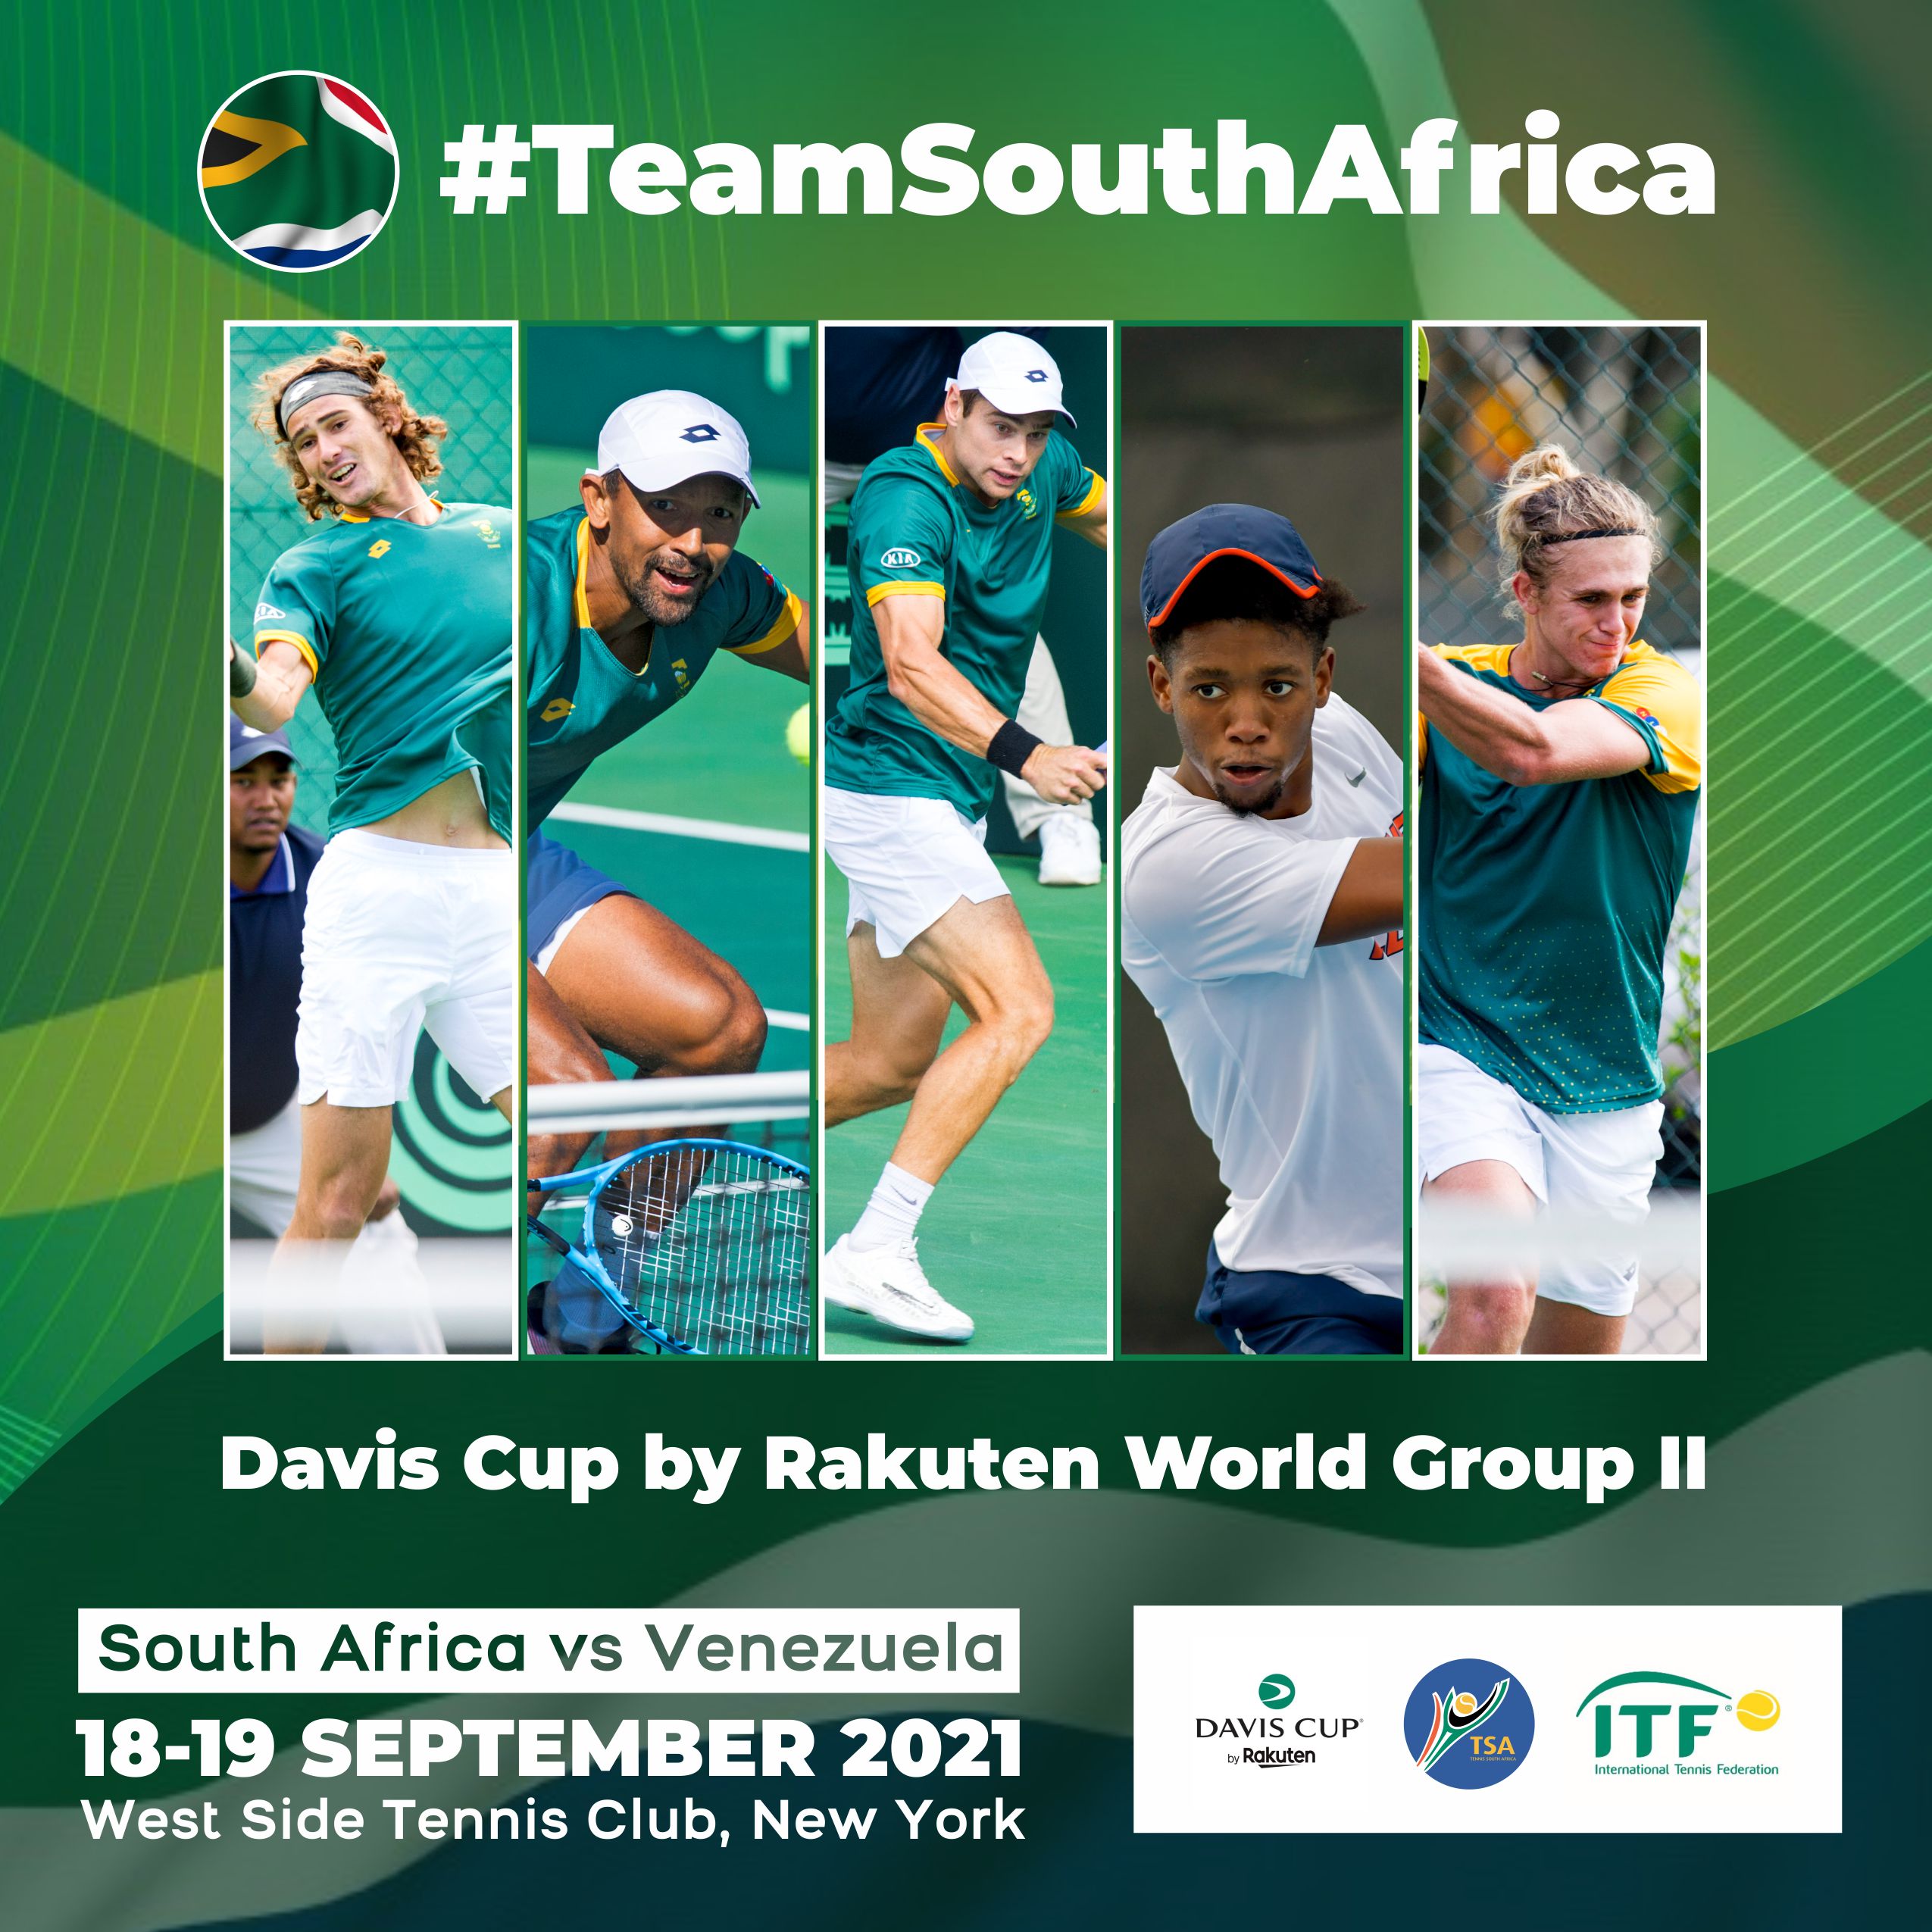 Watch the Davis Cup action live